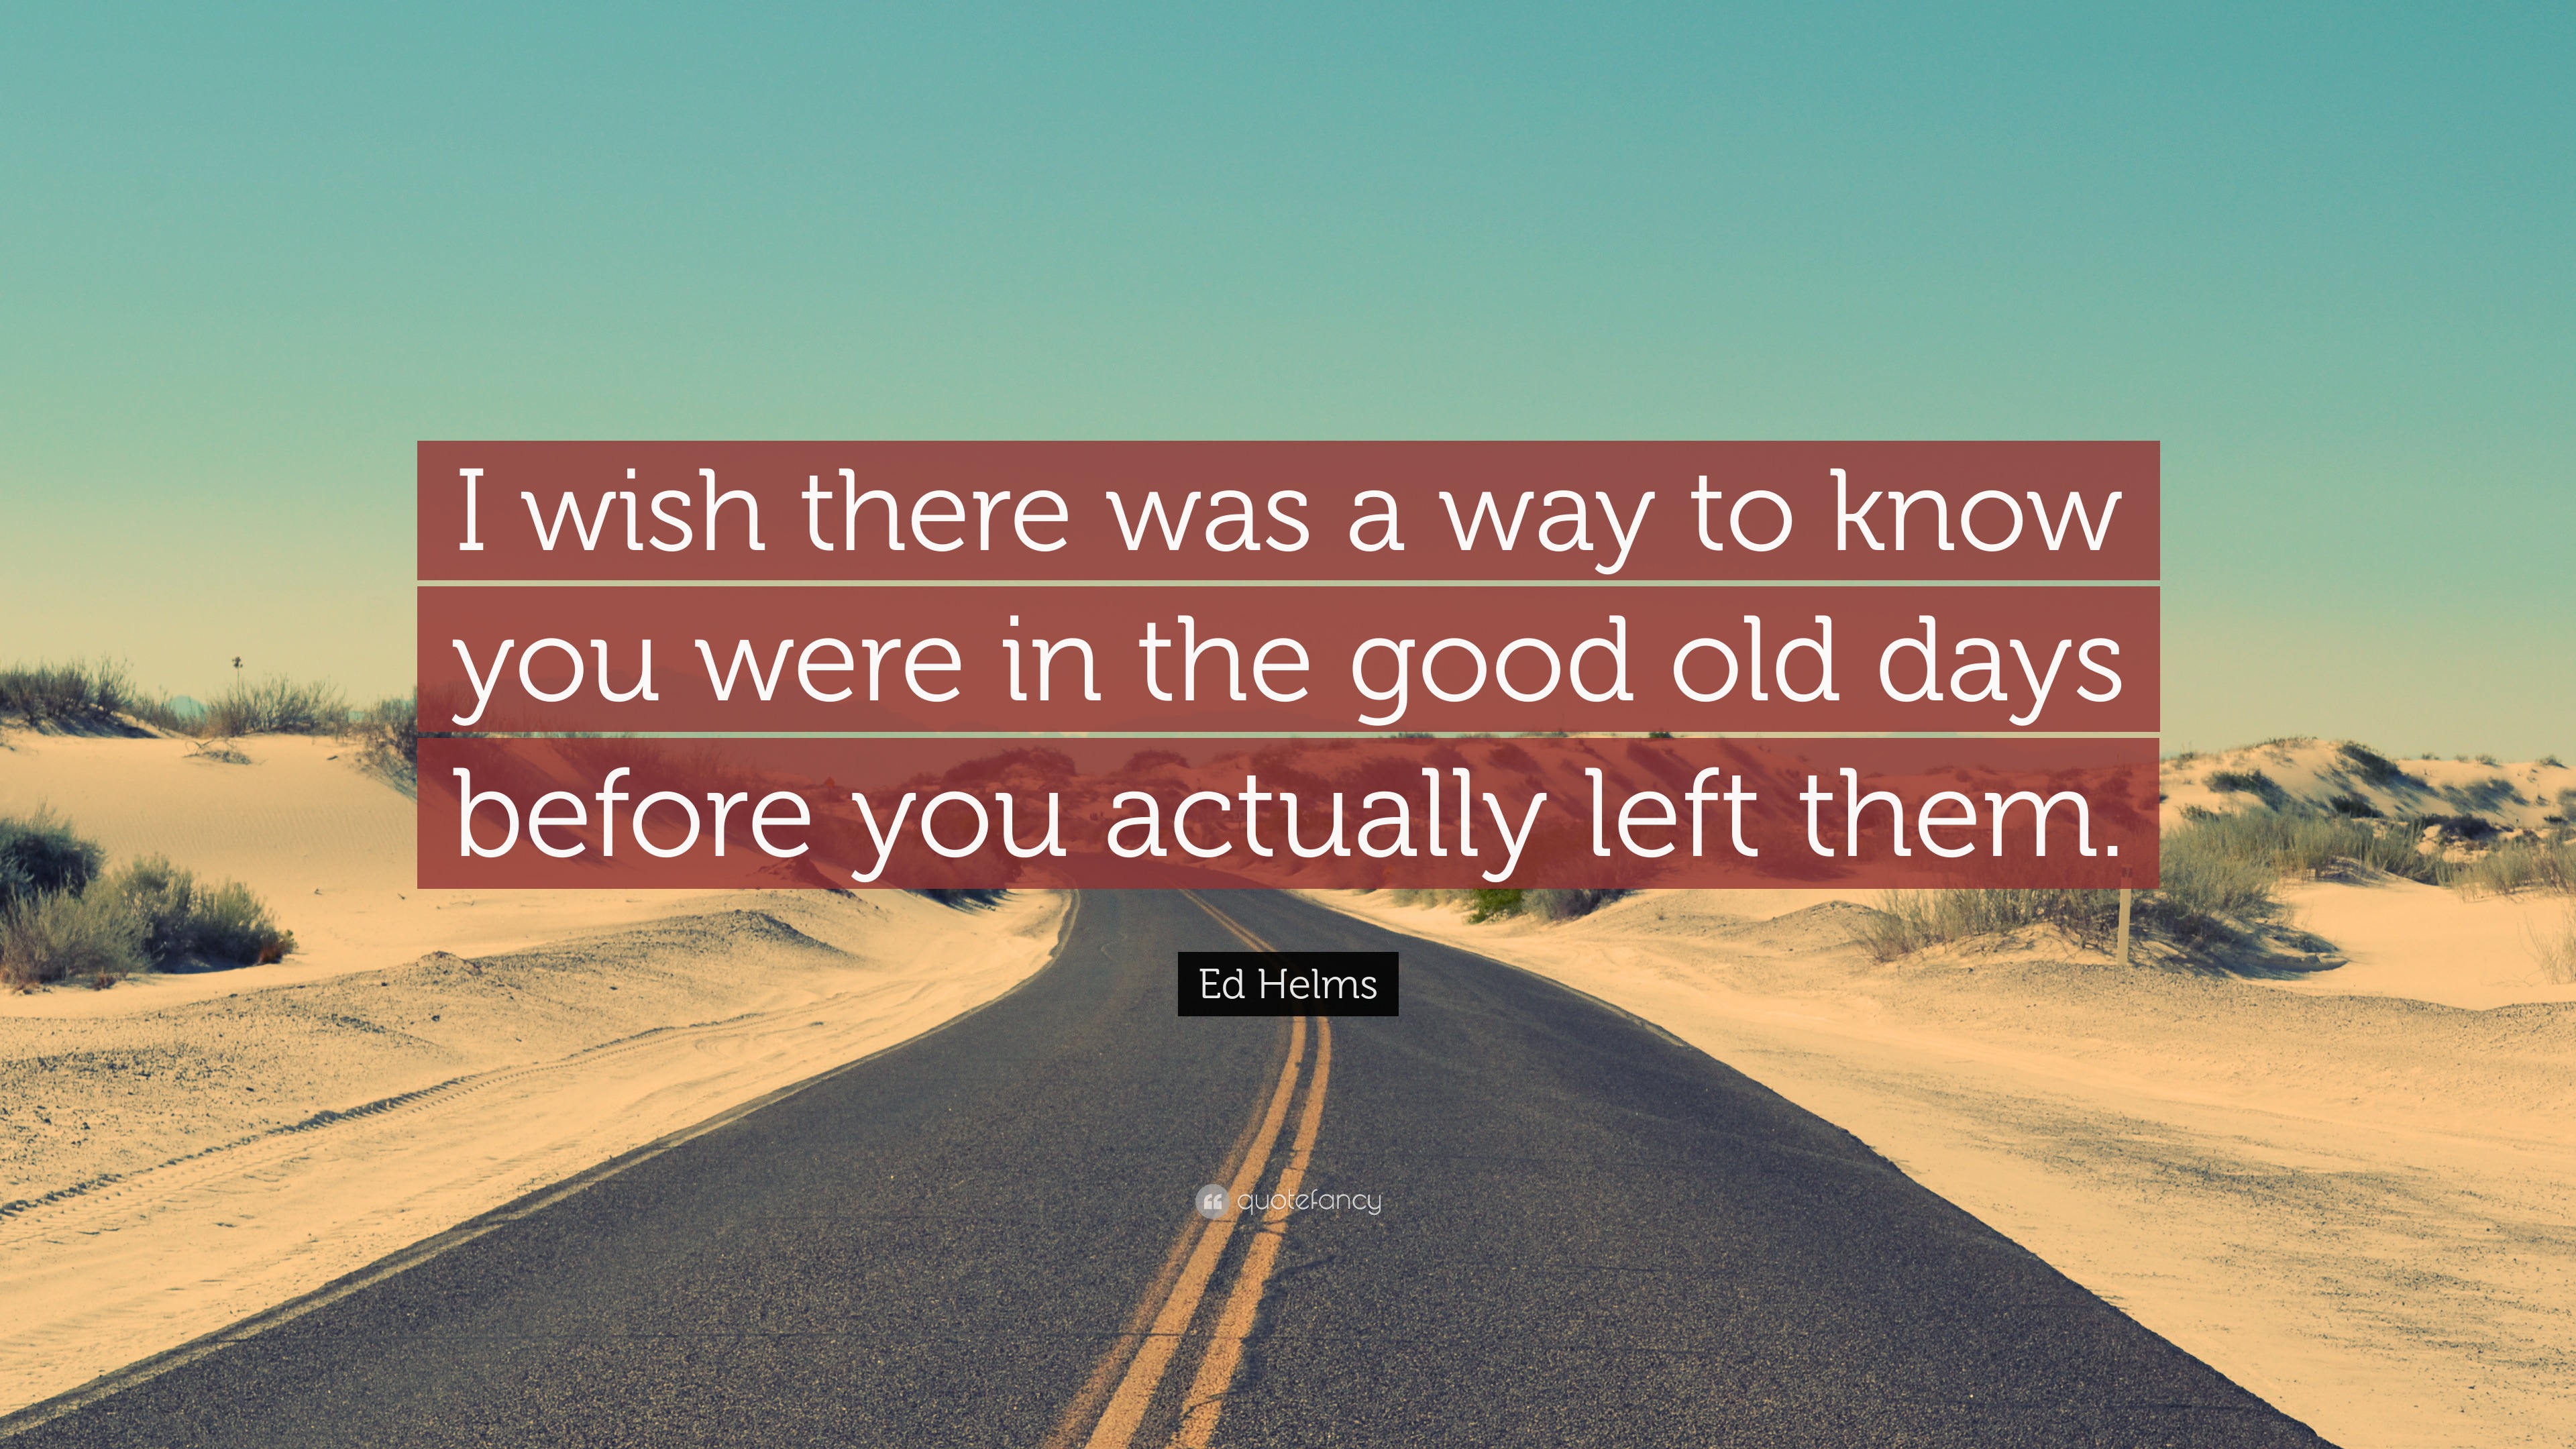 Ed Helms Quote: "I wish there was a way to know you were ...